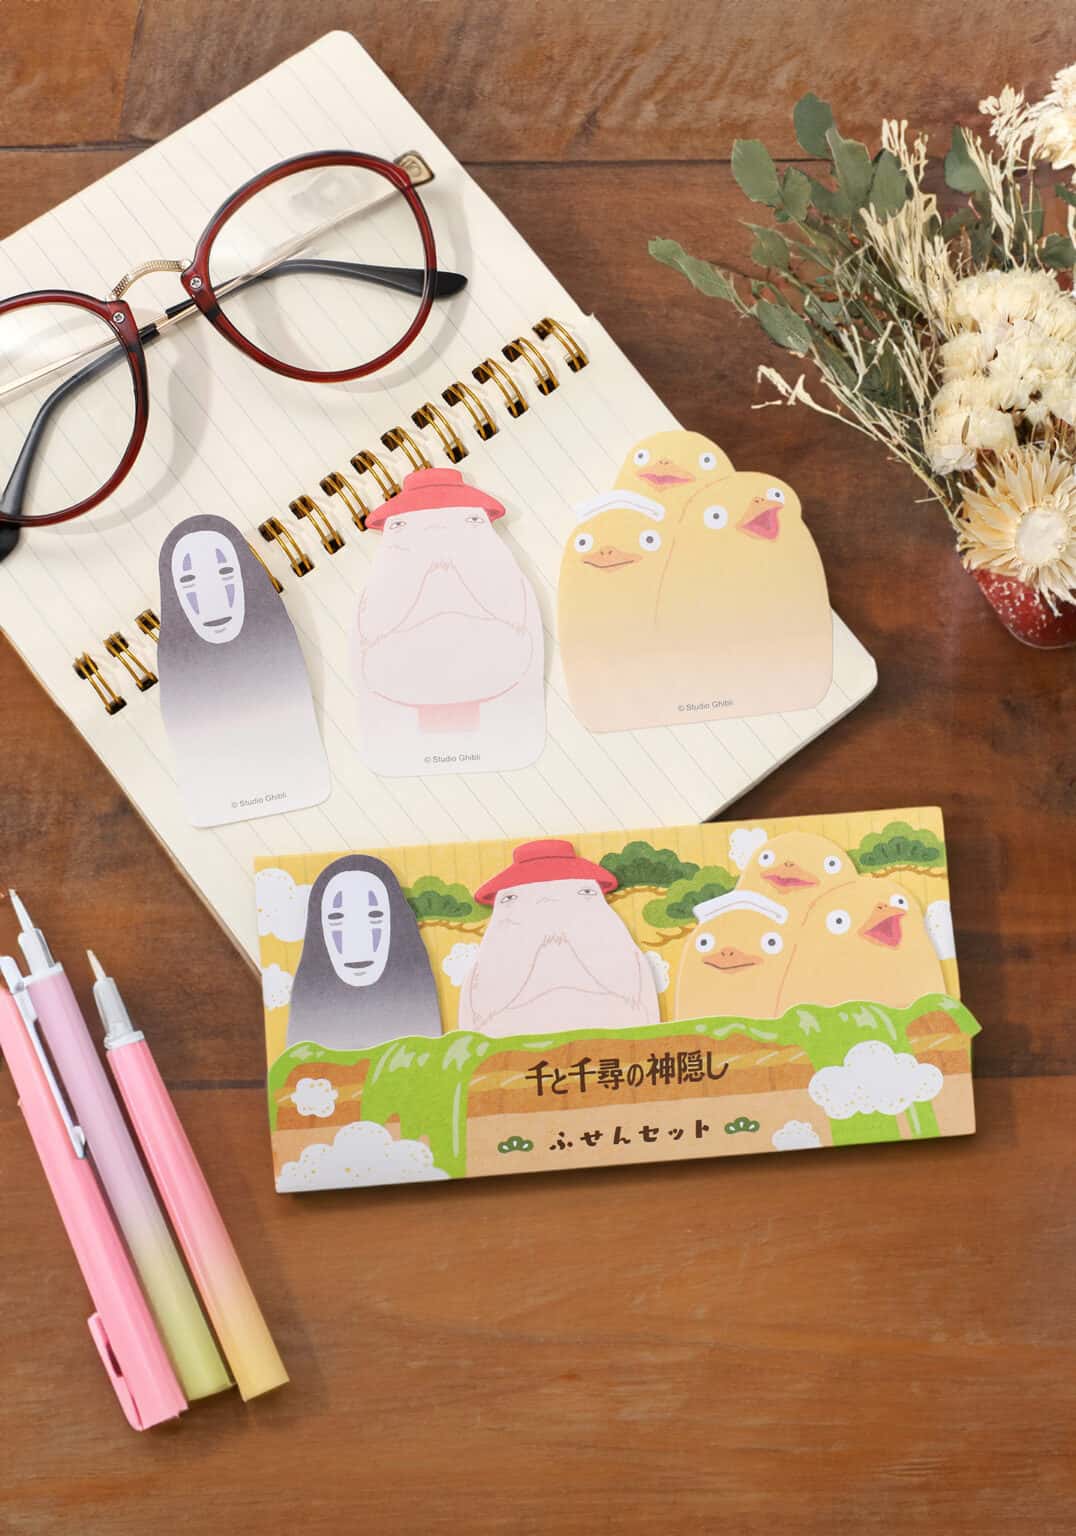 Clever Idiots Copy of Studio Ghibli Classics Sticky Notes Sets Kawaii Gifts